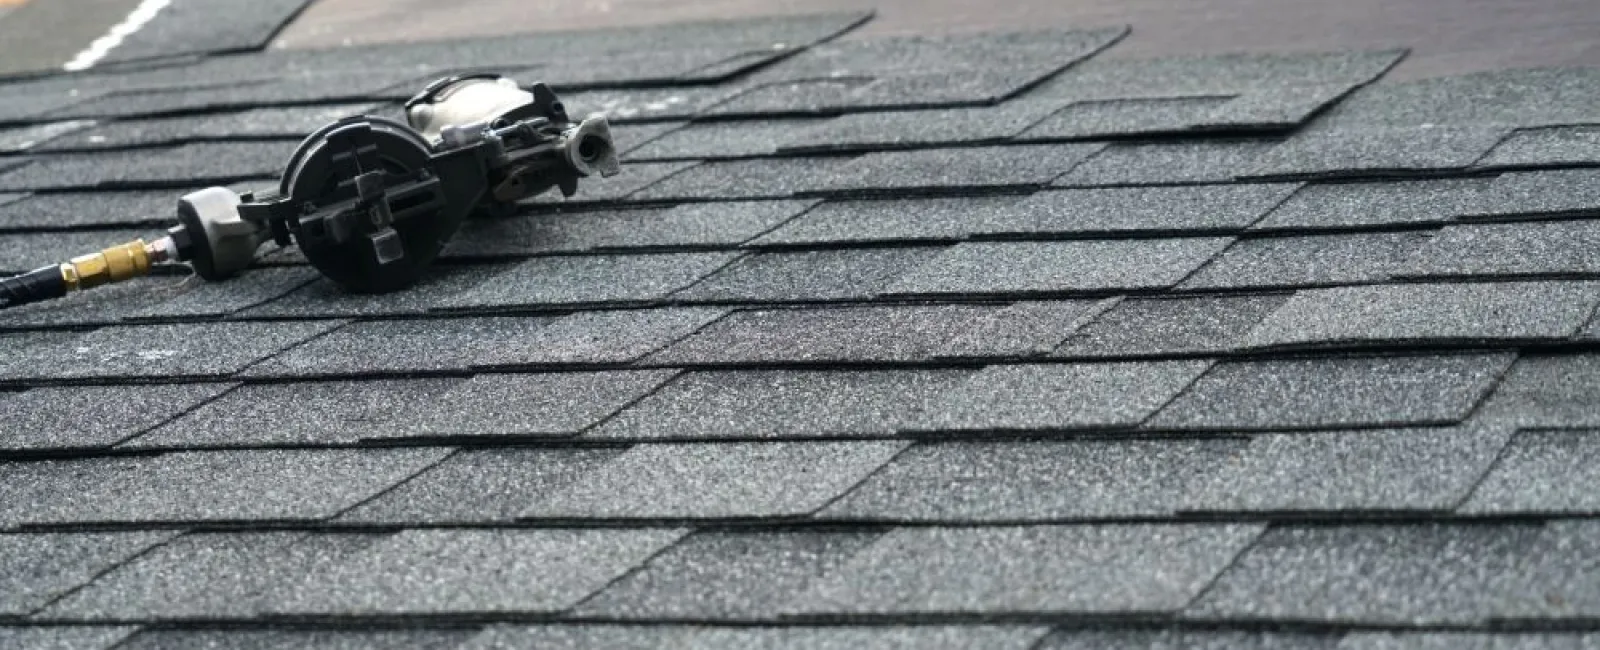 7 Common Homeowner Roofing Mistakes To Avoid